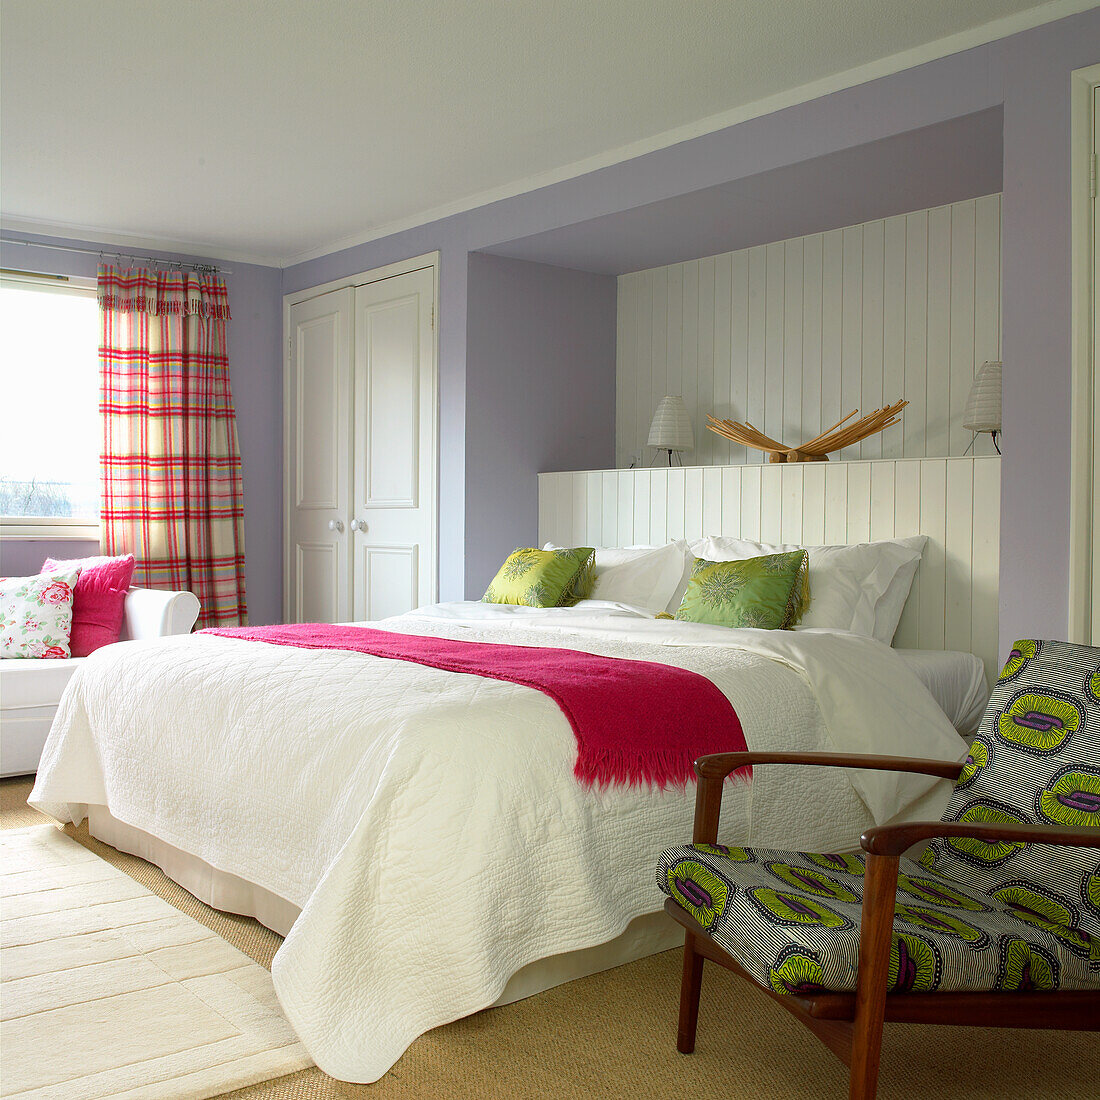 Bright bedroom with wooden bed, white bed linen and colorful accents